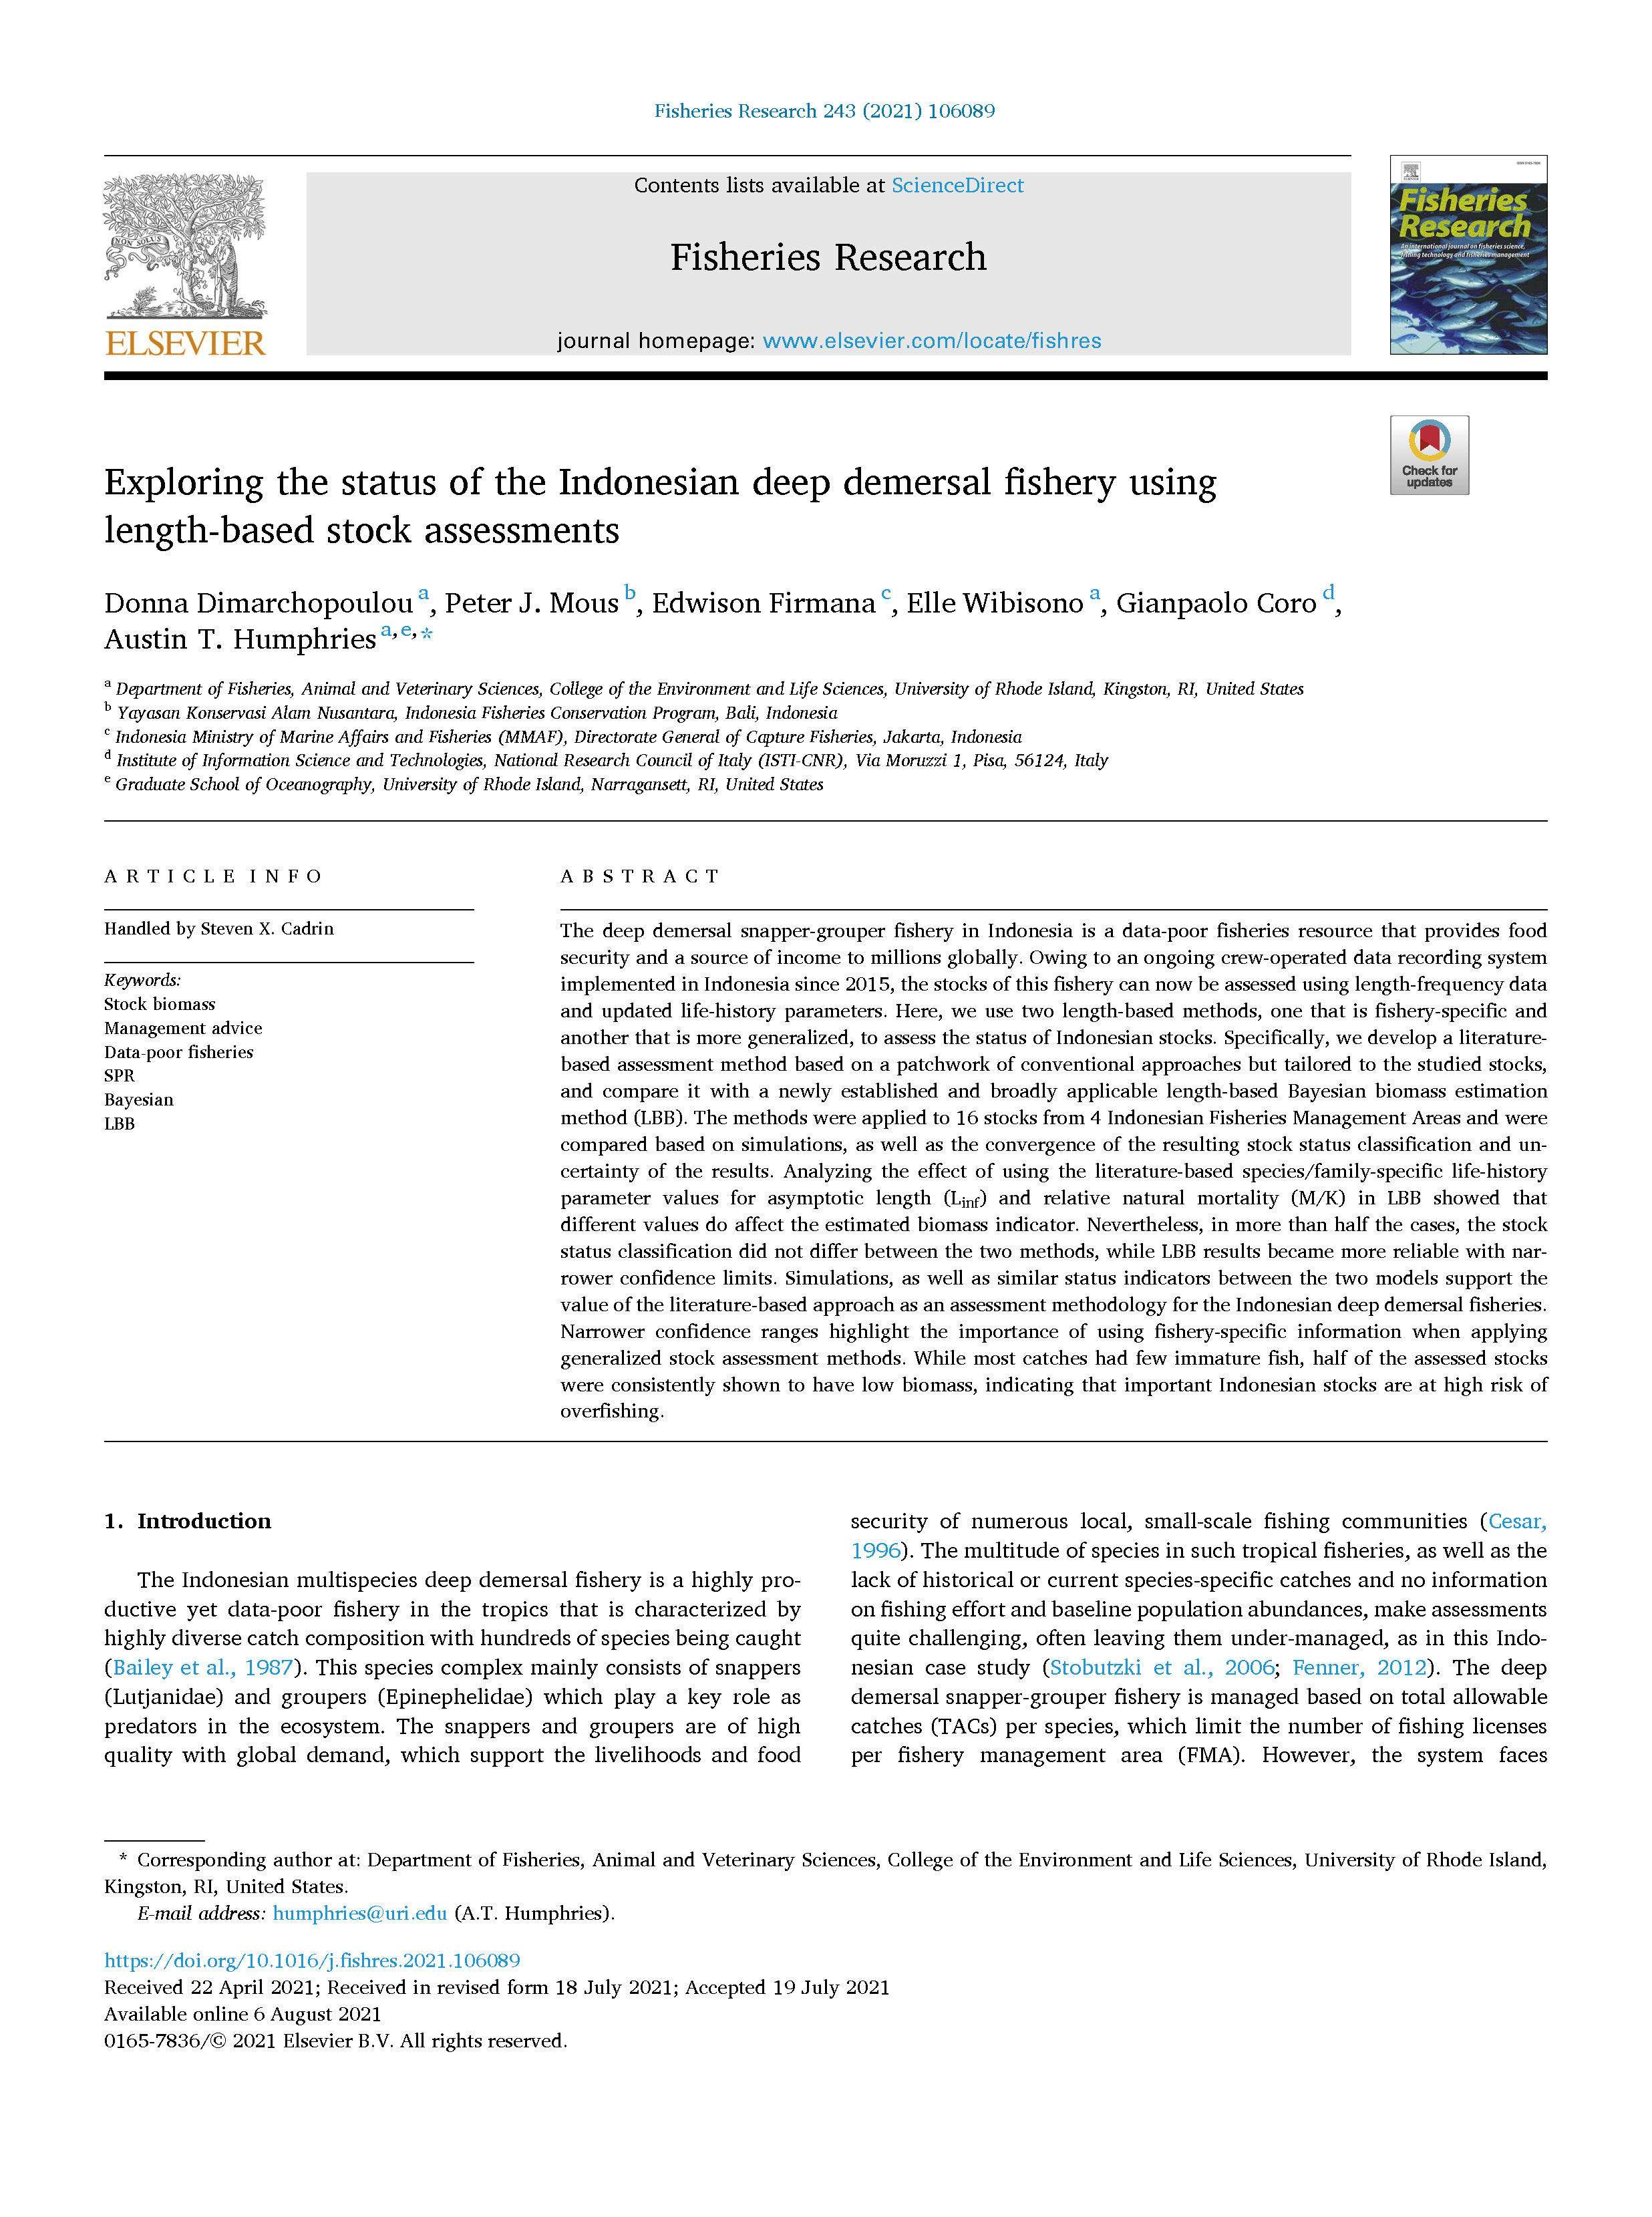 Exploring the status of the Indonesian deep demersal fishery using length-based stock assessments